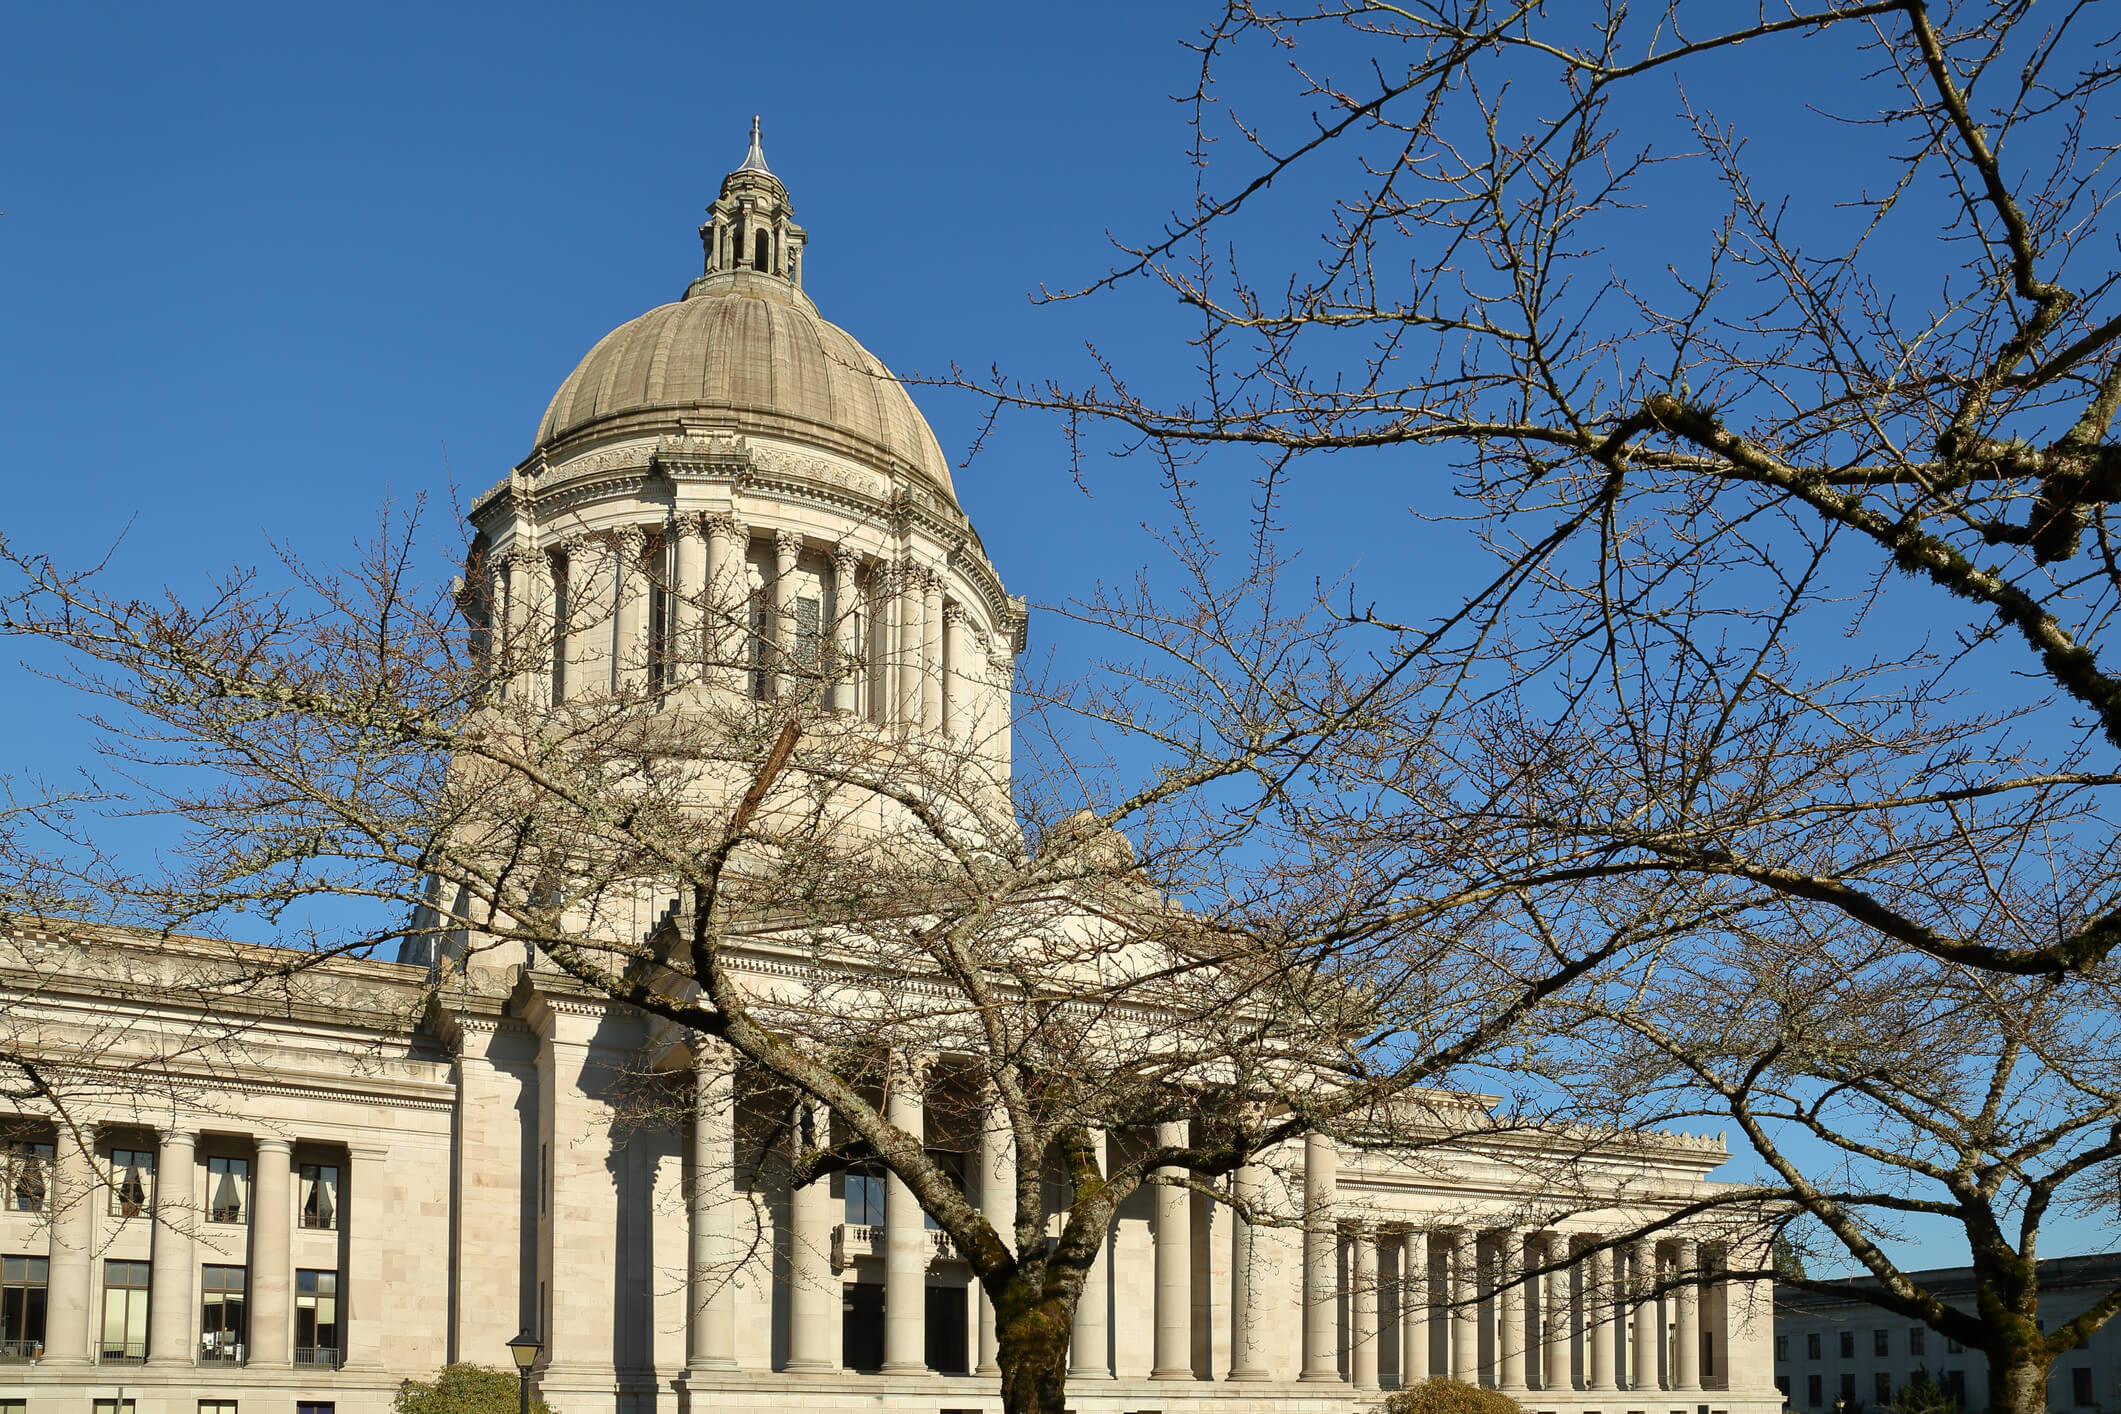 Dome of the Washington state capital building in Olympia